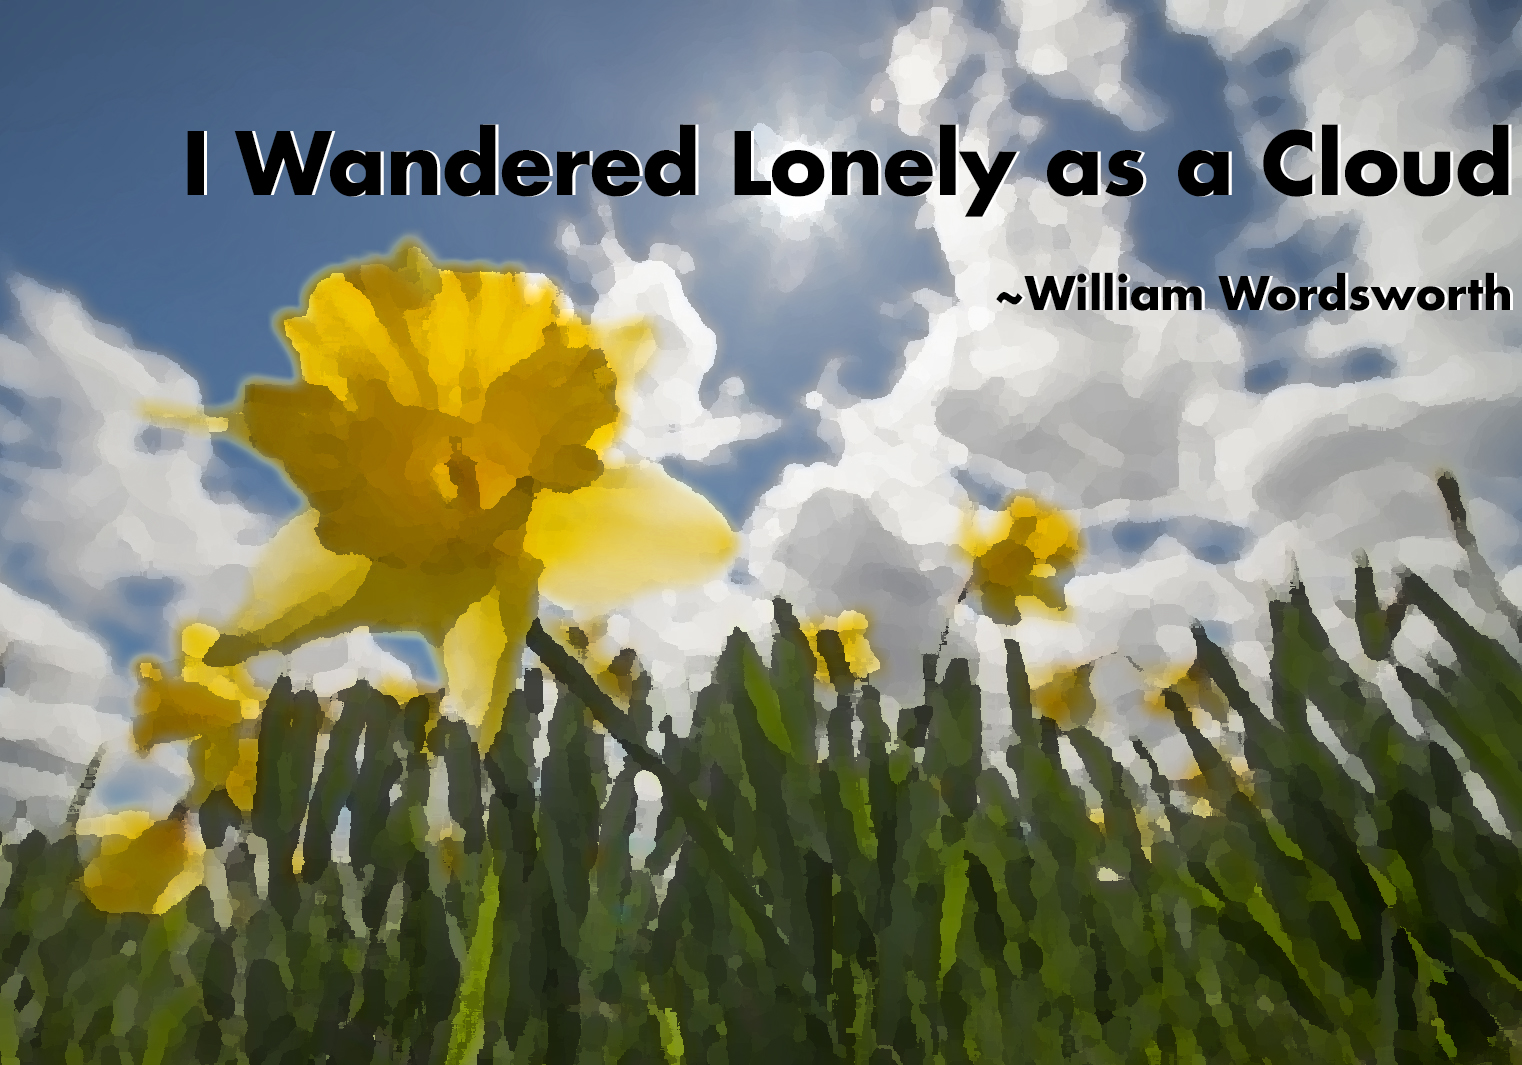 I wandered Lonely as a Cloud poetry book cover with daffodils